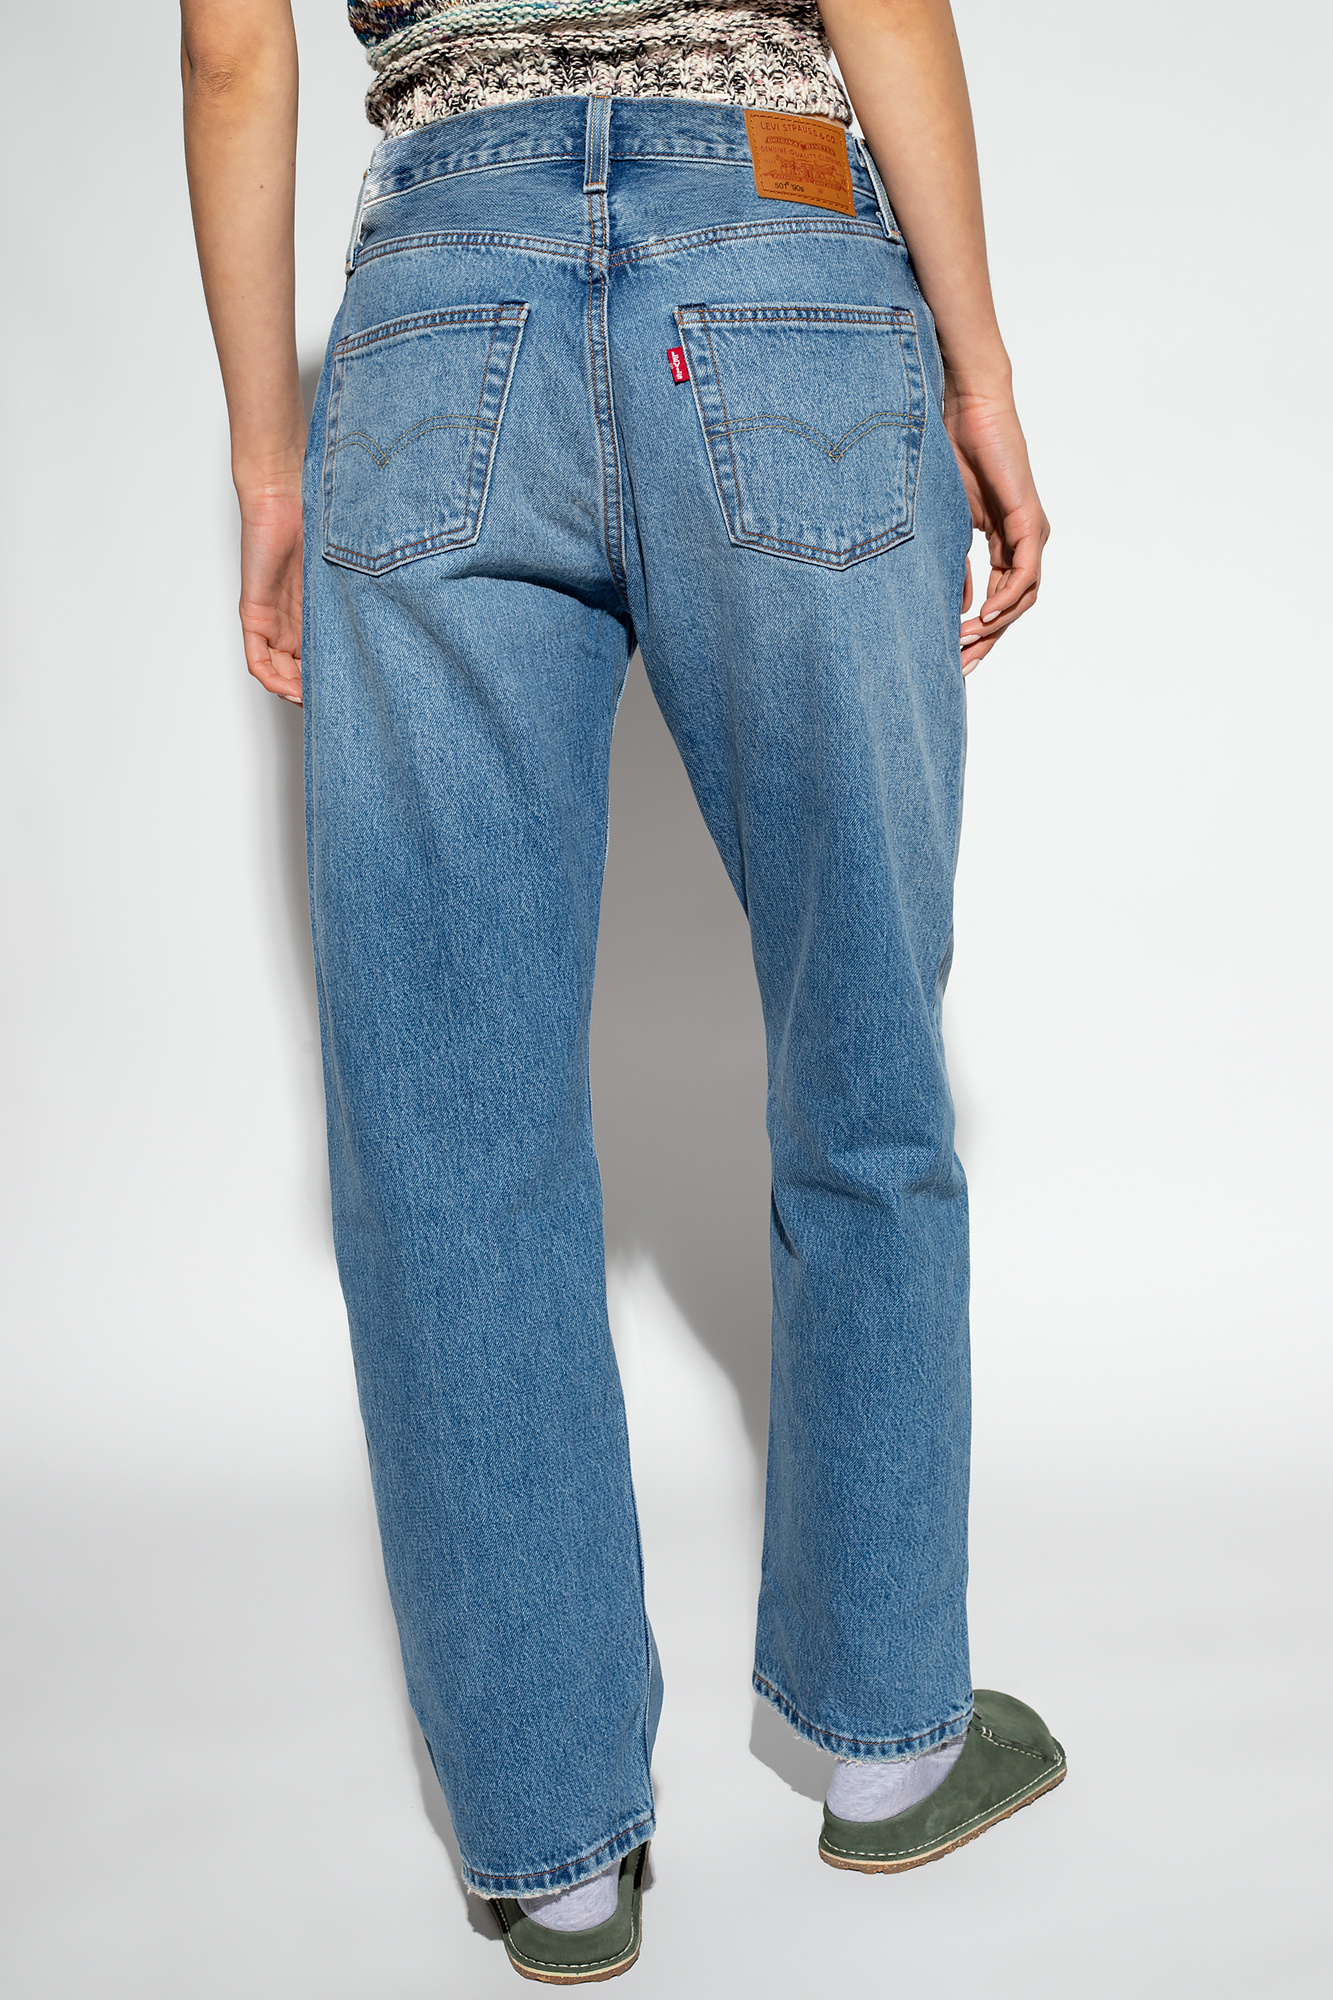 Levi's '501® 90'S' jeans from 'Responsibly Made' collection